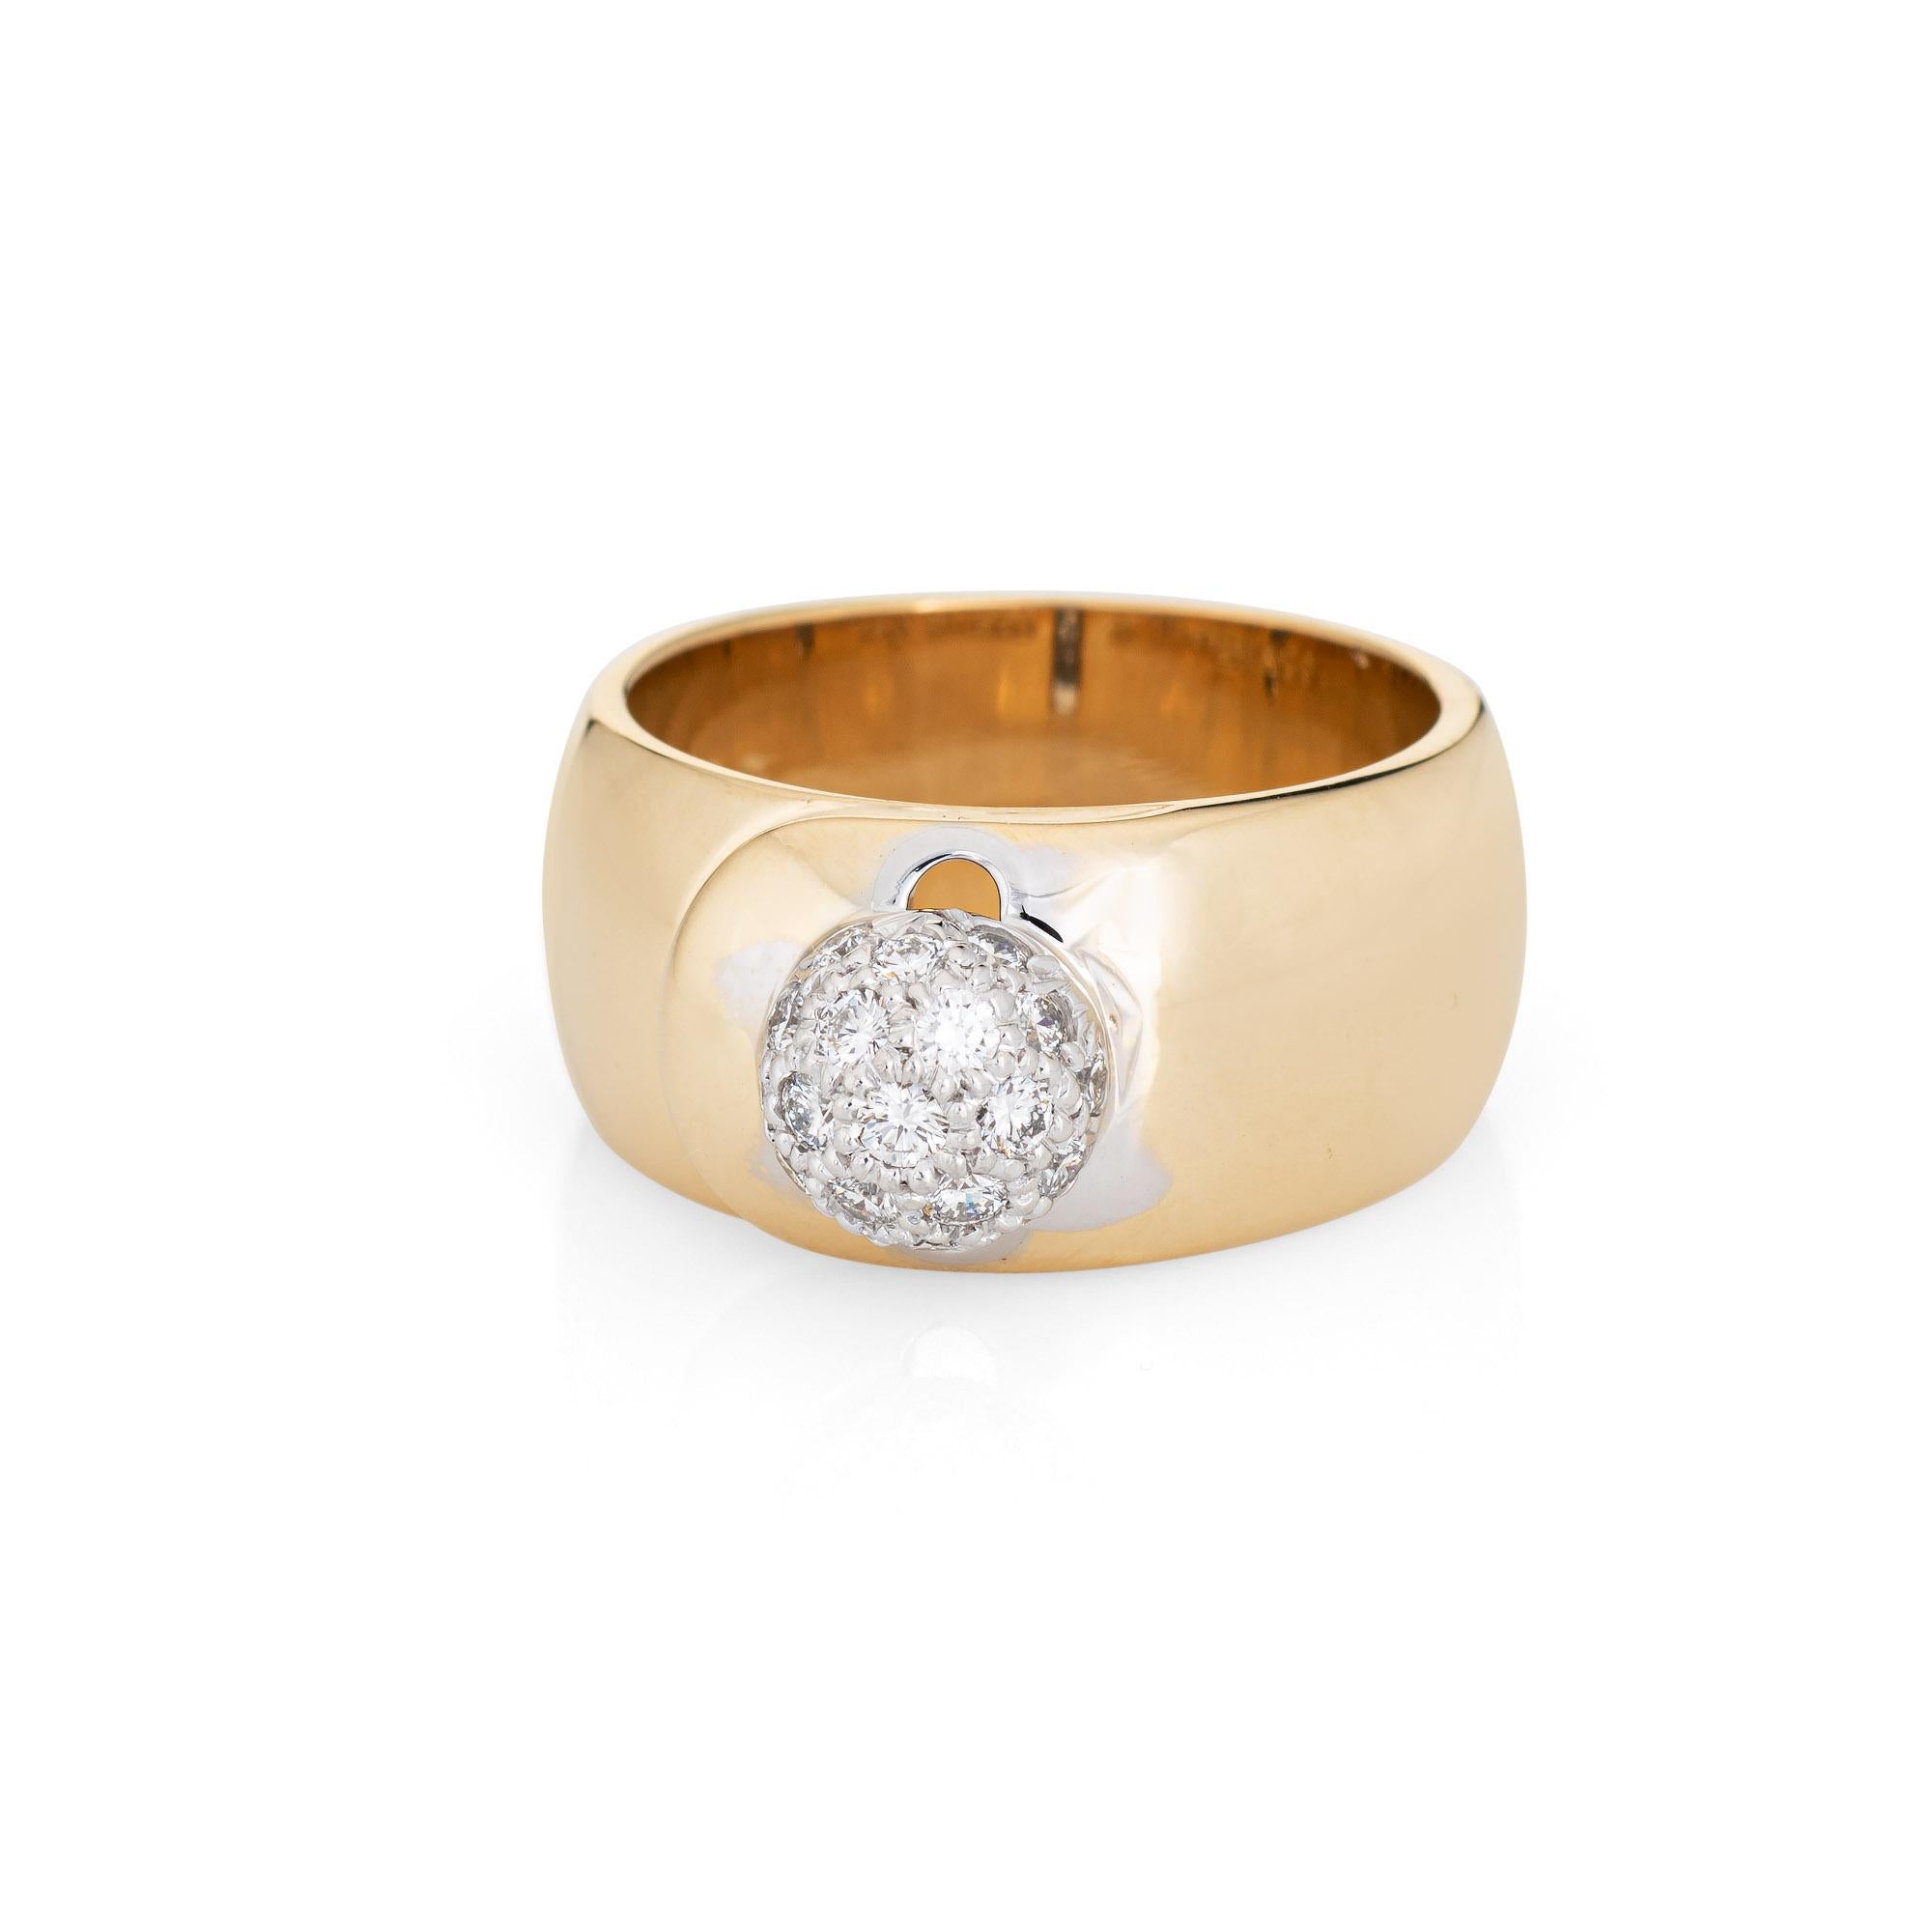 Vintage Tiffany & Co diamond ball ring (attributed to Paloma Picasso), crafted in 18 karat yellow gold & platinum (circa 1980s).  

Round brilliant cut diamonds total an estimated 0.50 carats (estimated at G-H color and VS1-2 clarity).

Dating to